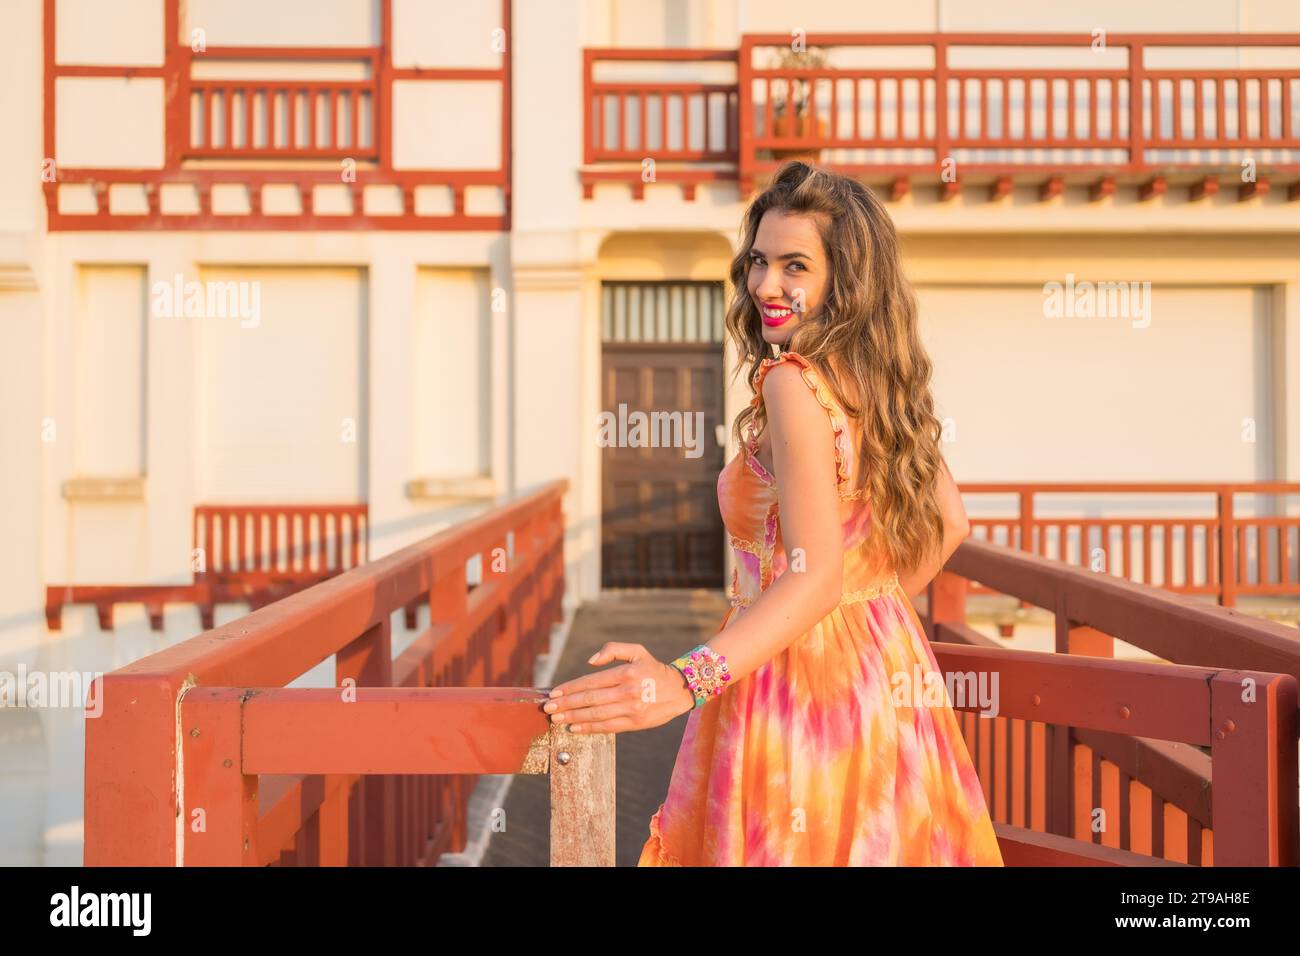 Pretty woman with long dress turning to smile at camera during sunset in a coastal bridge Stock Photo